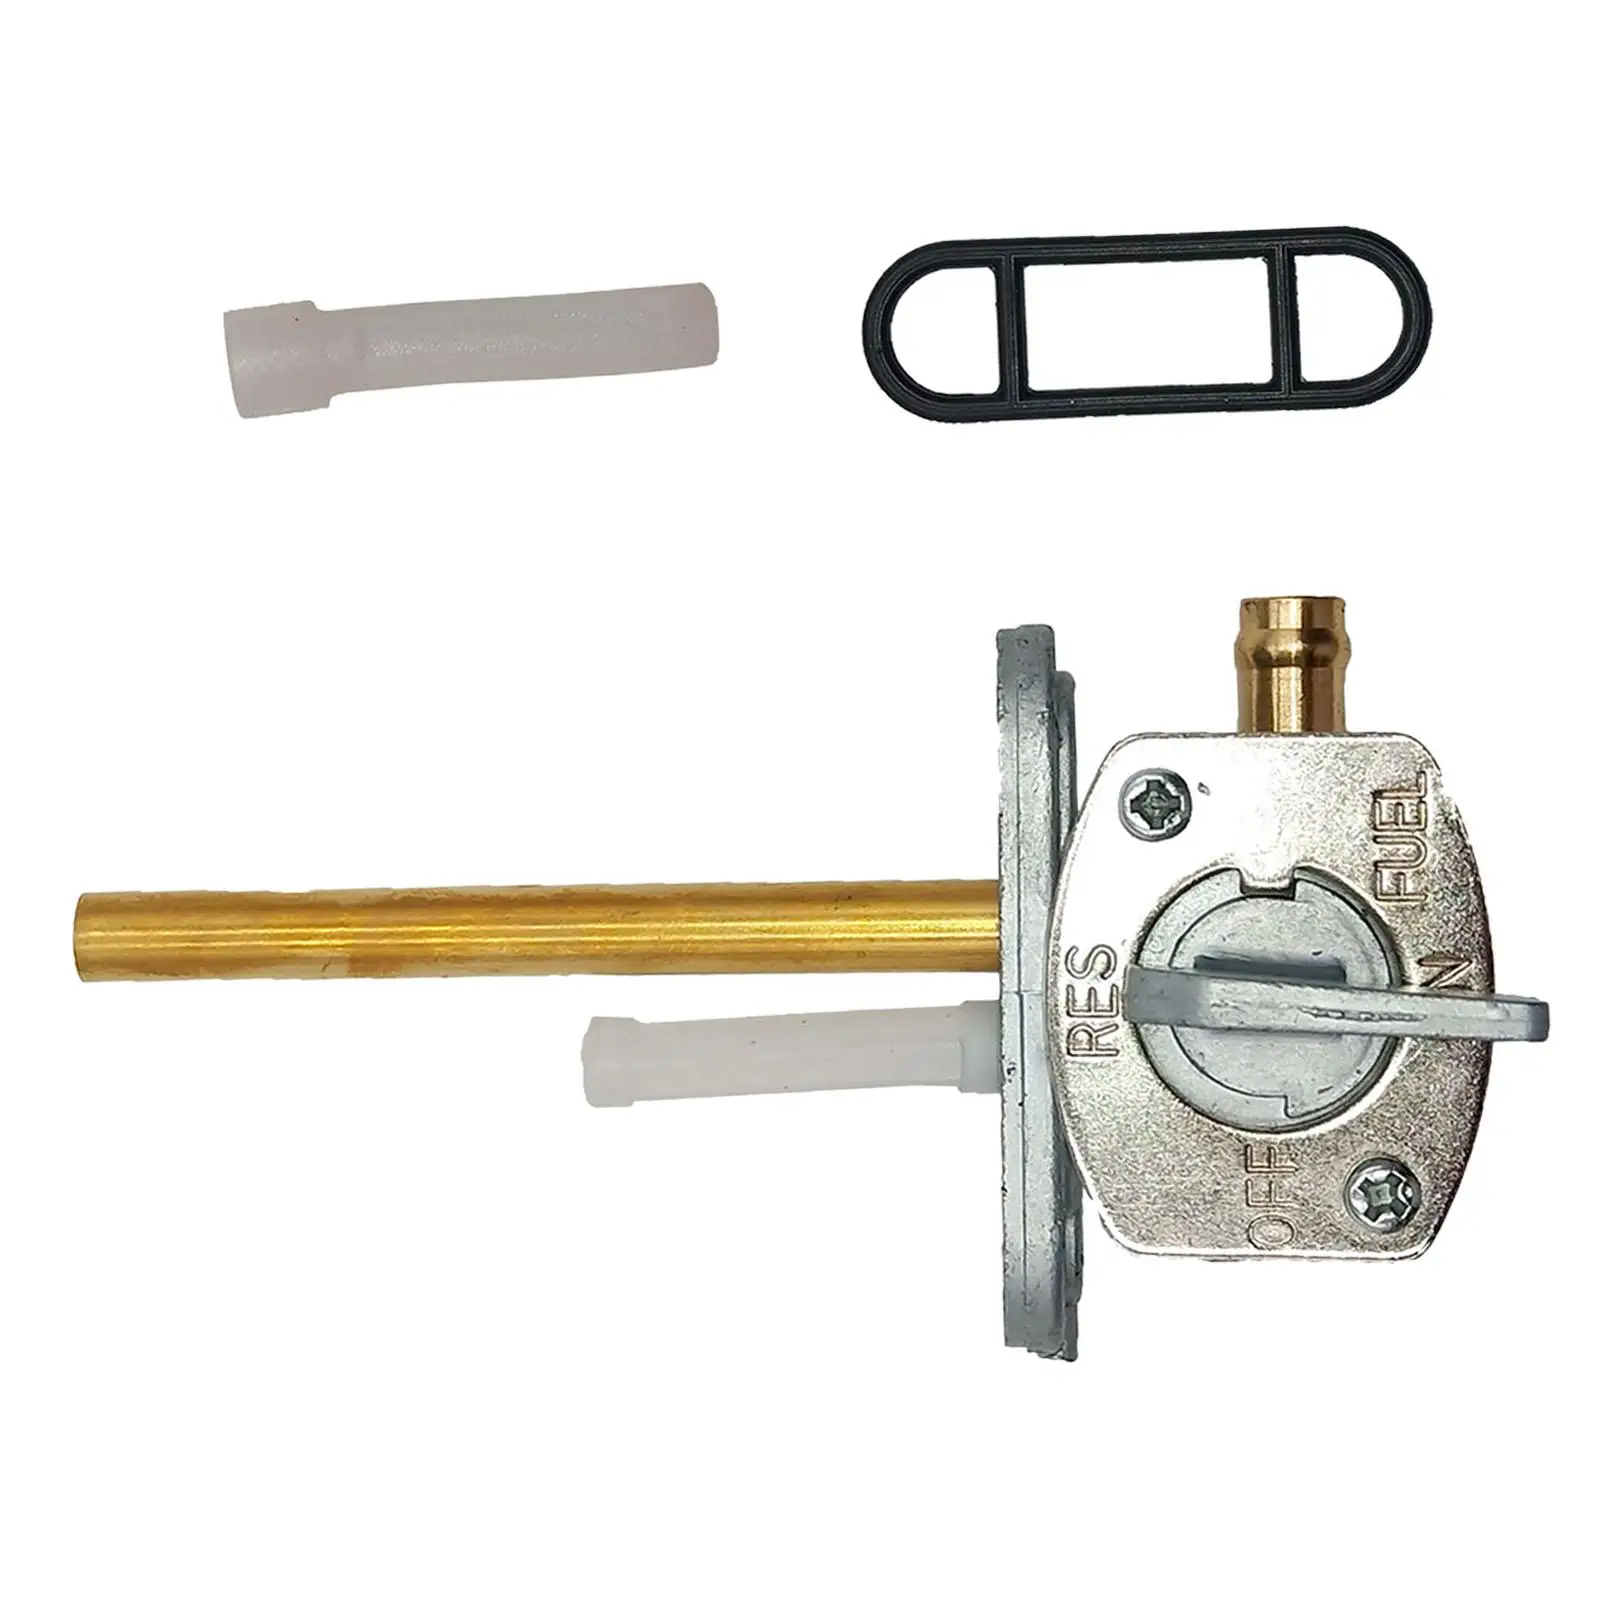 Replace 2Gu-24500-02 Fuel Cock Tap Petcock Valve Replacement for 350 Easy to